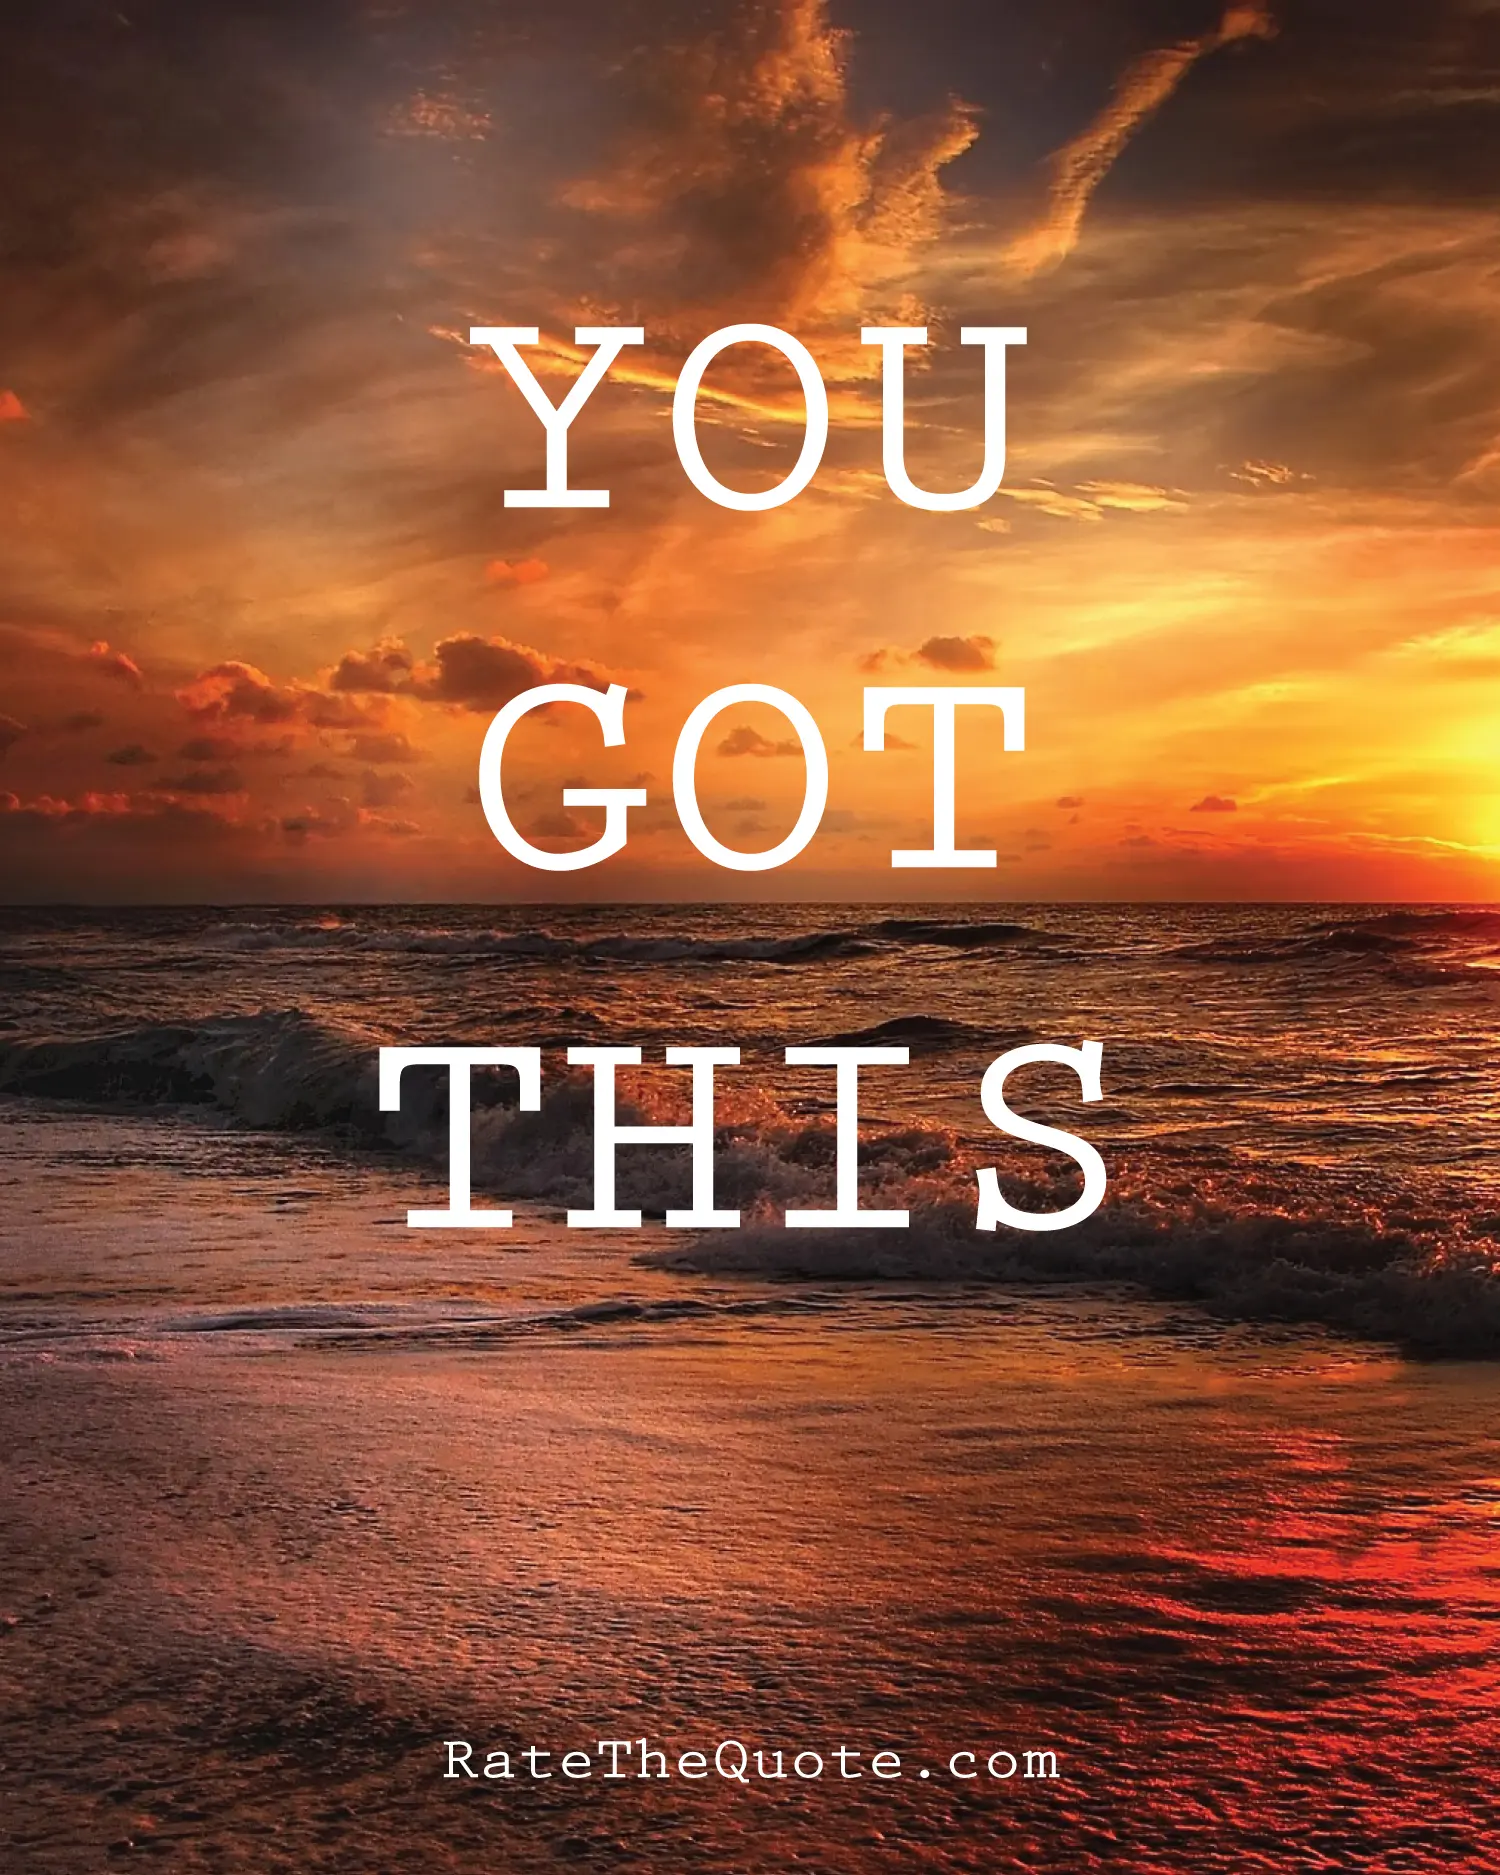 You got this!